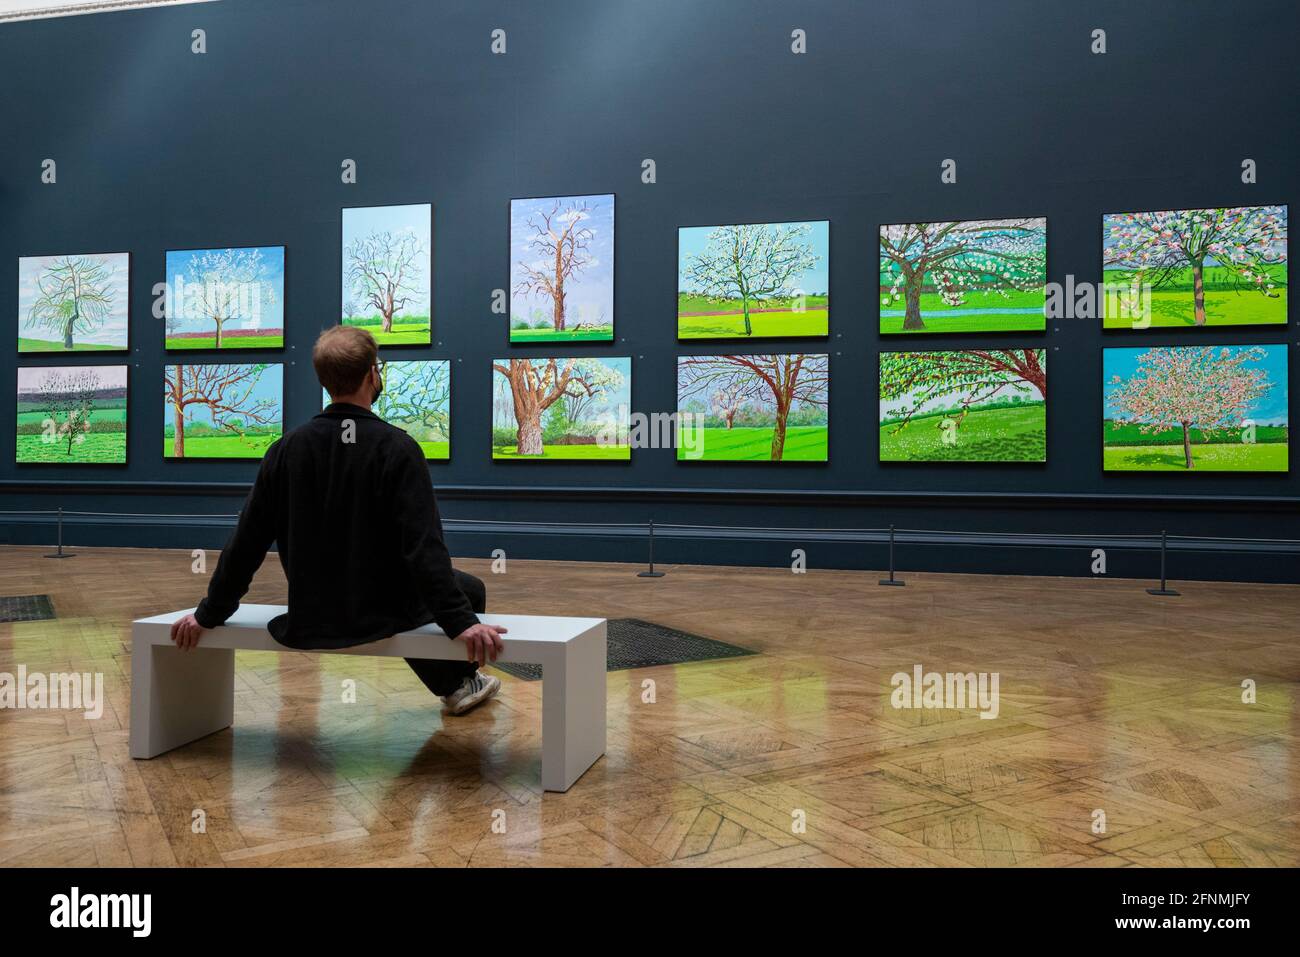 https://c8.alamy.com/comp/2FNMJFY/london-uk-18-may-2021-gallery-staff-pose-at-the-preview-of-david-hockney-the-arrival-of-spring-normandy-2020-at-the-royal-academy-of-arts-in-piccadilly-the-new-body-of-work-created-by-david-hockney-ra-charts-the-unfolding-and-progression-of-spring-in-normandy-with-the-works-created-during-the-beginning-of-the-coronavirus-pandemic-exhibited-for-the-first-time-the-show-runs-from-23-may-to-26-september-2021-credit-stephen-chung-alamy-live-news-2FNMJFY.jpg